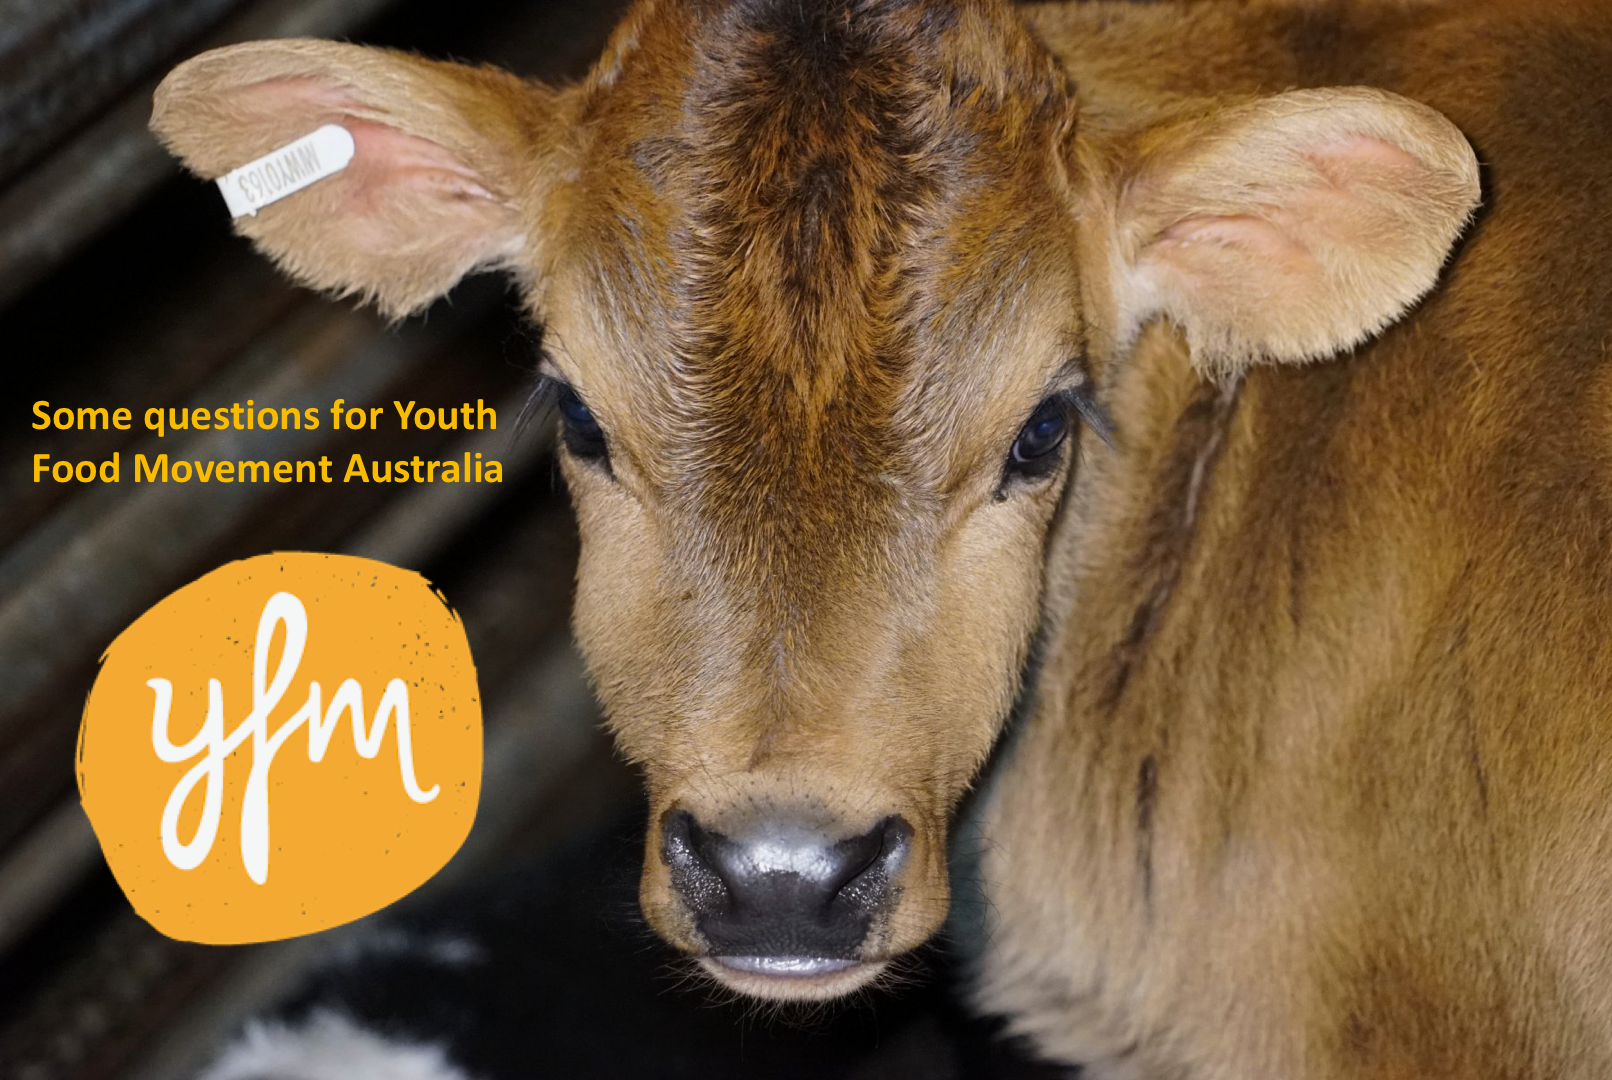 Some questions for Youth Food Movement Australia